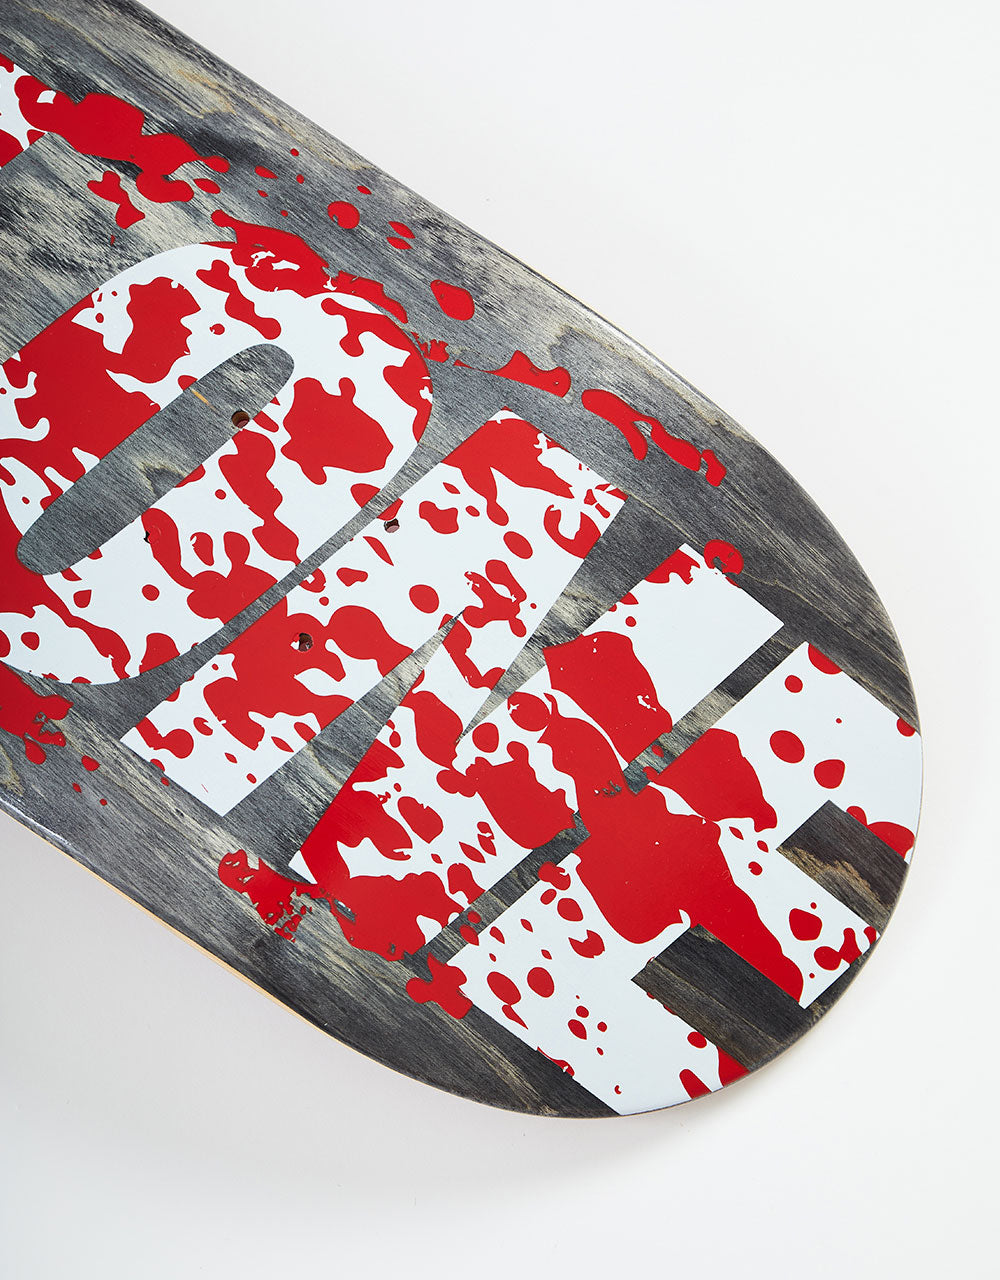 Route One Blood Sweat and Tears Skateboard Deck - 8.5"